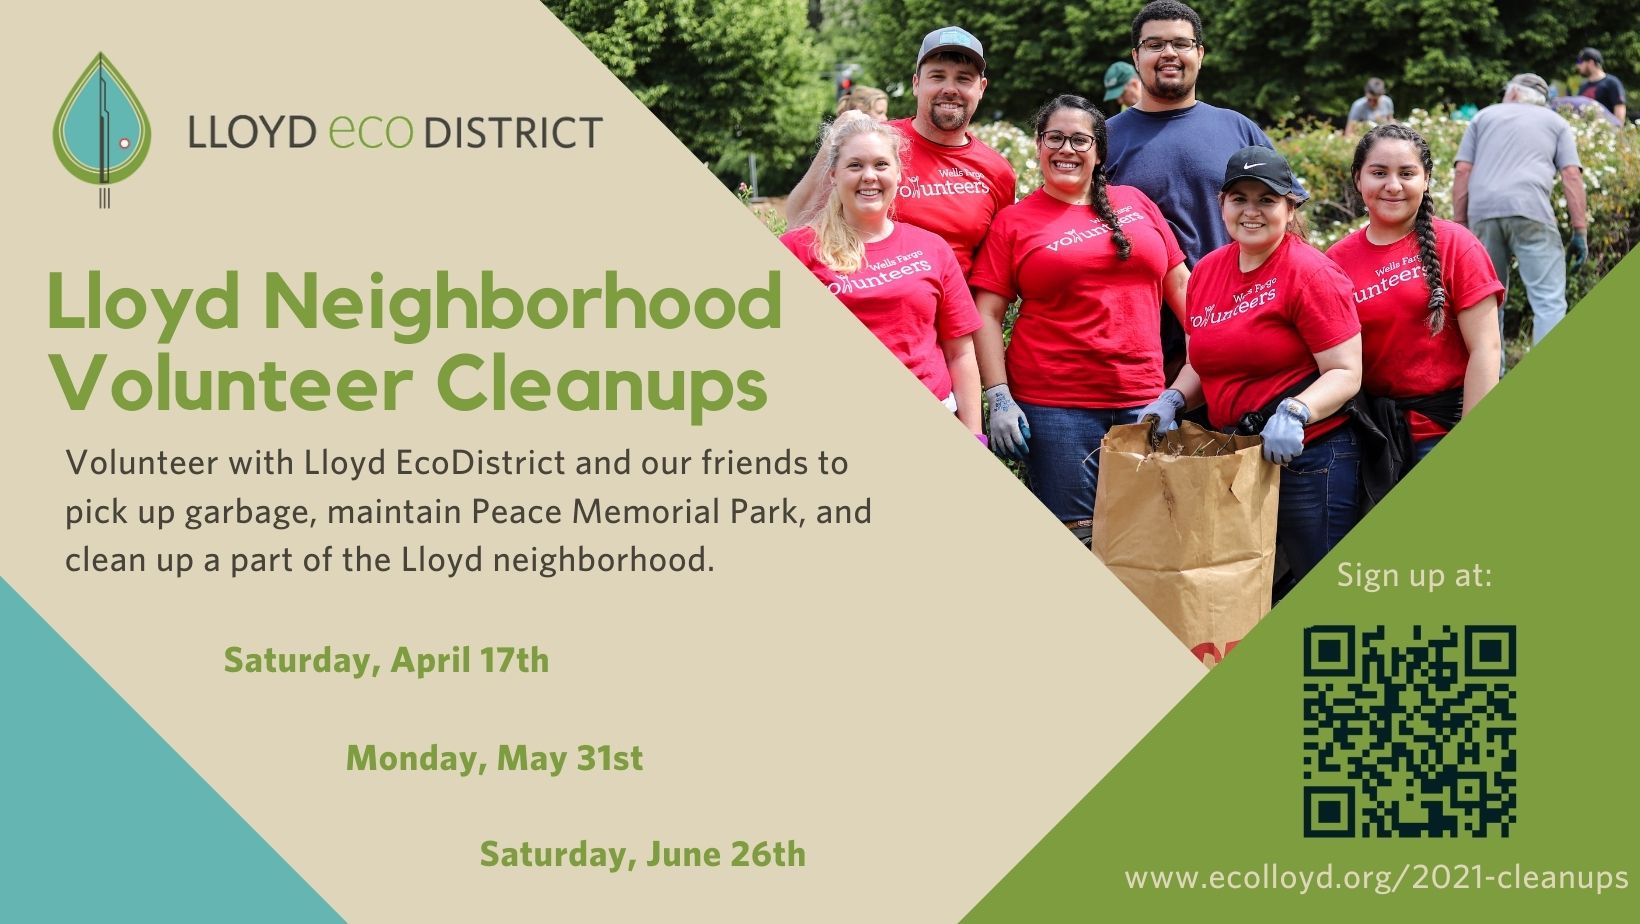 Peace Memorial Park / Lloyd EcoDistrict Cleanup